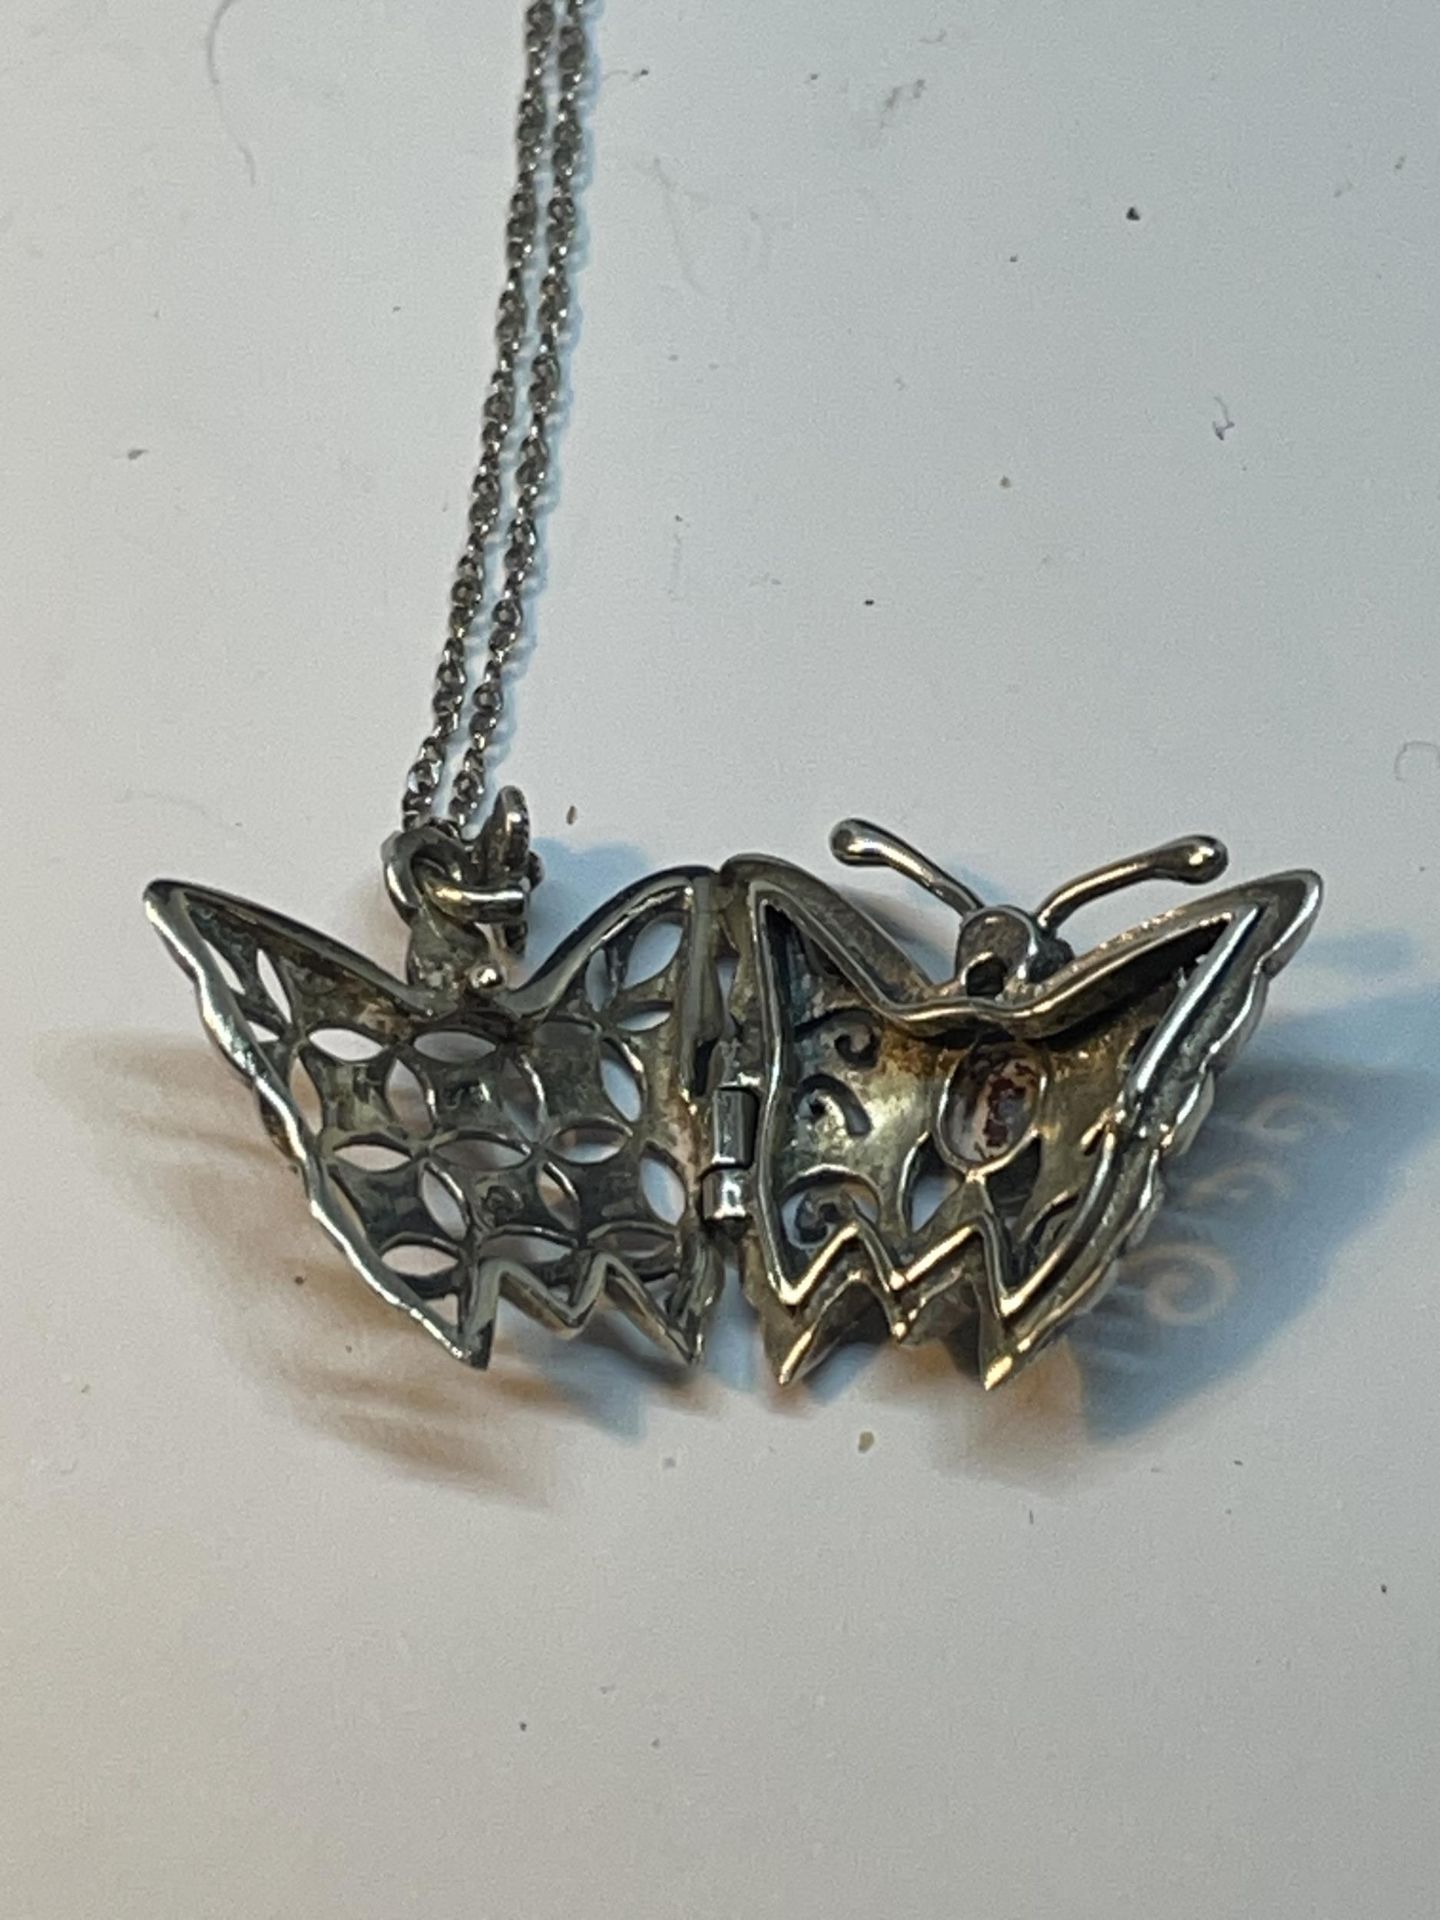 A MARKED 925 SILVER ORNATE BUTTERFLY LOCKET ON A CHAIN - Image 4 of 4